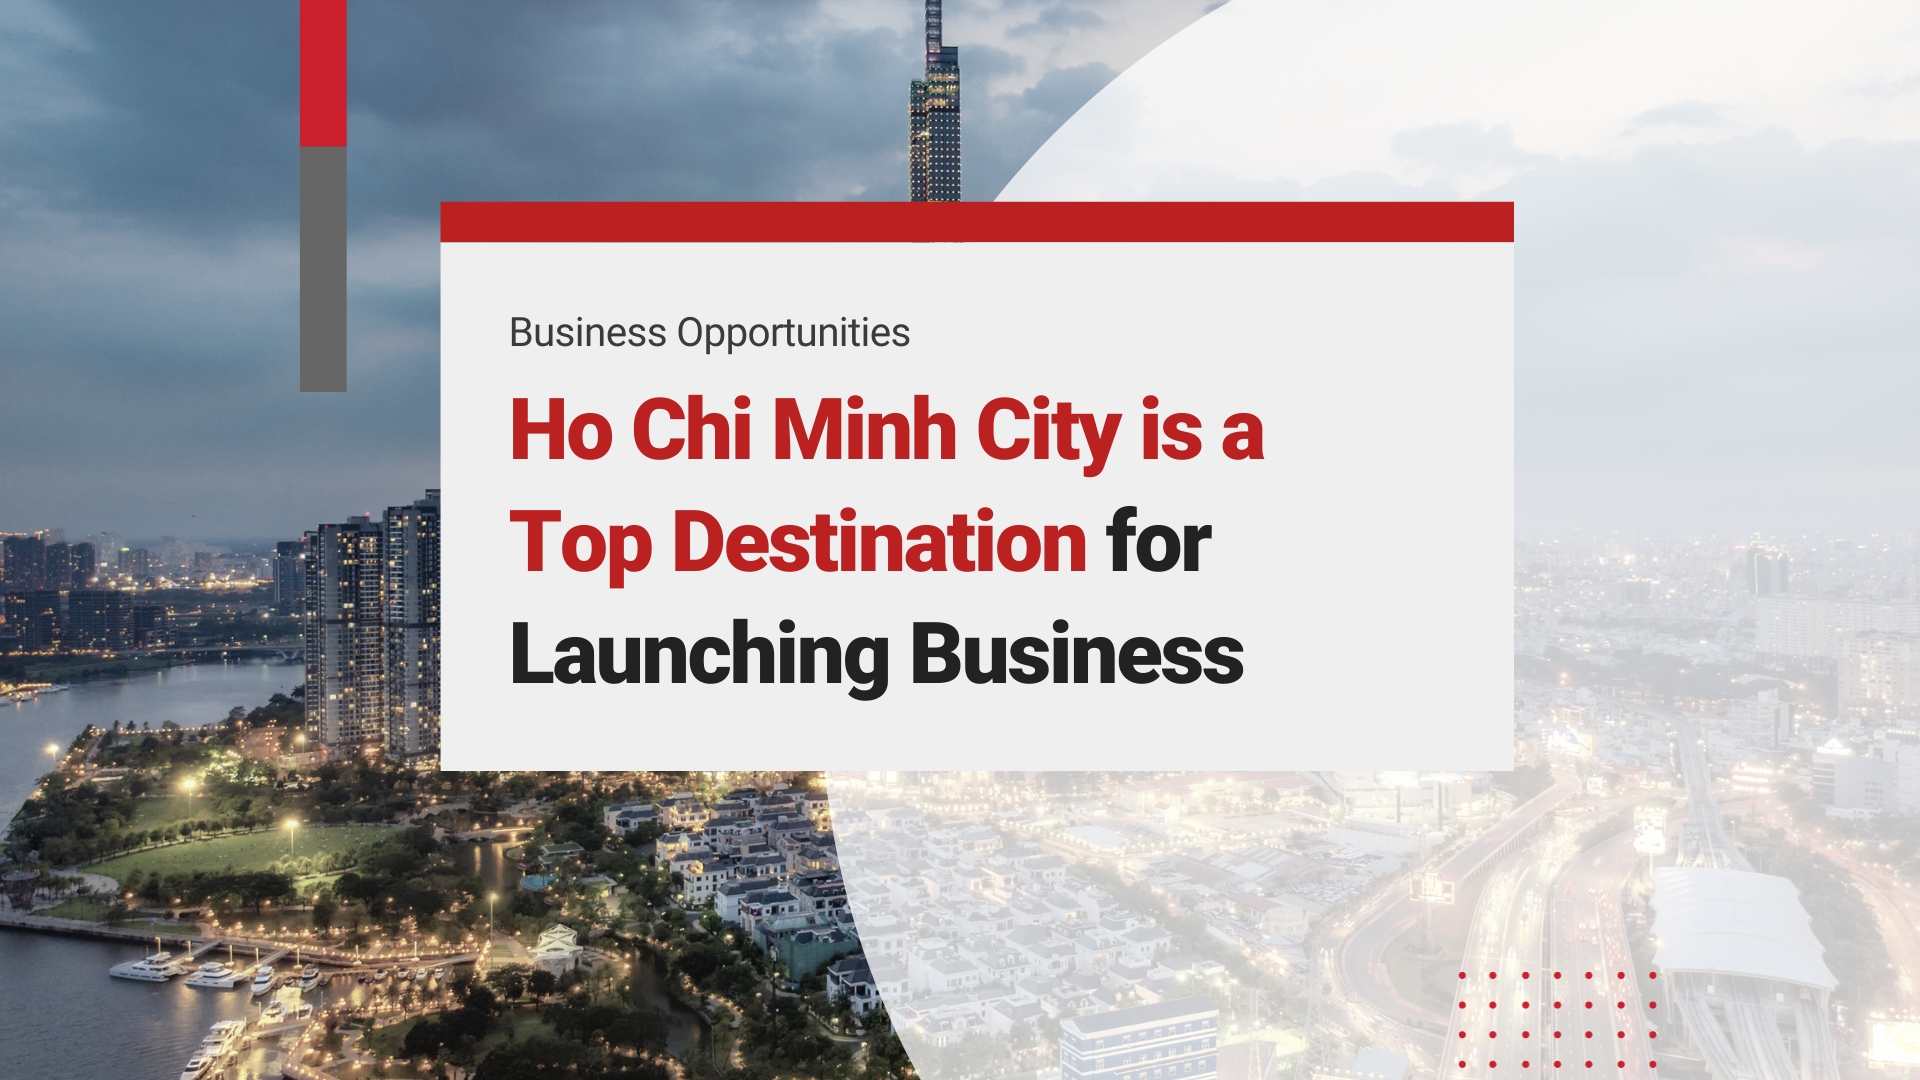 Ho Chi Minh City is a Top Destination for Launching Business